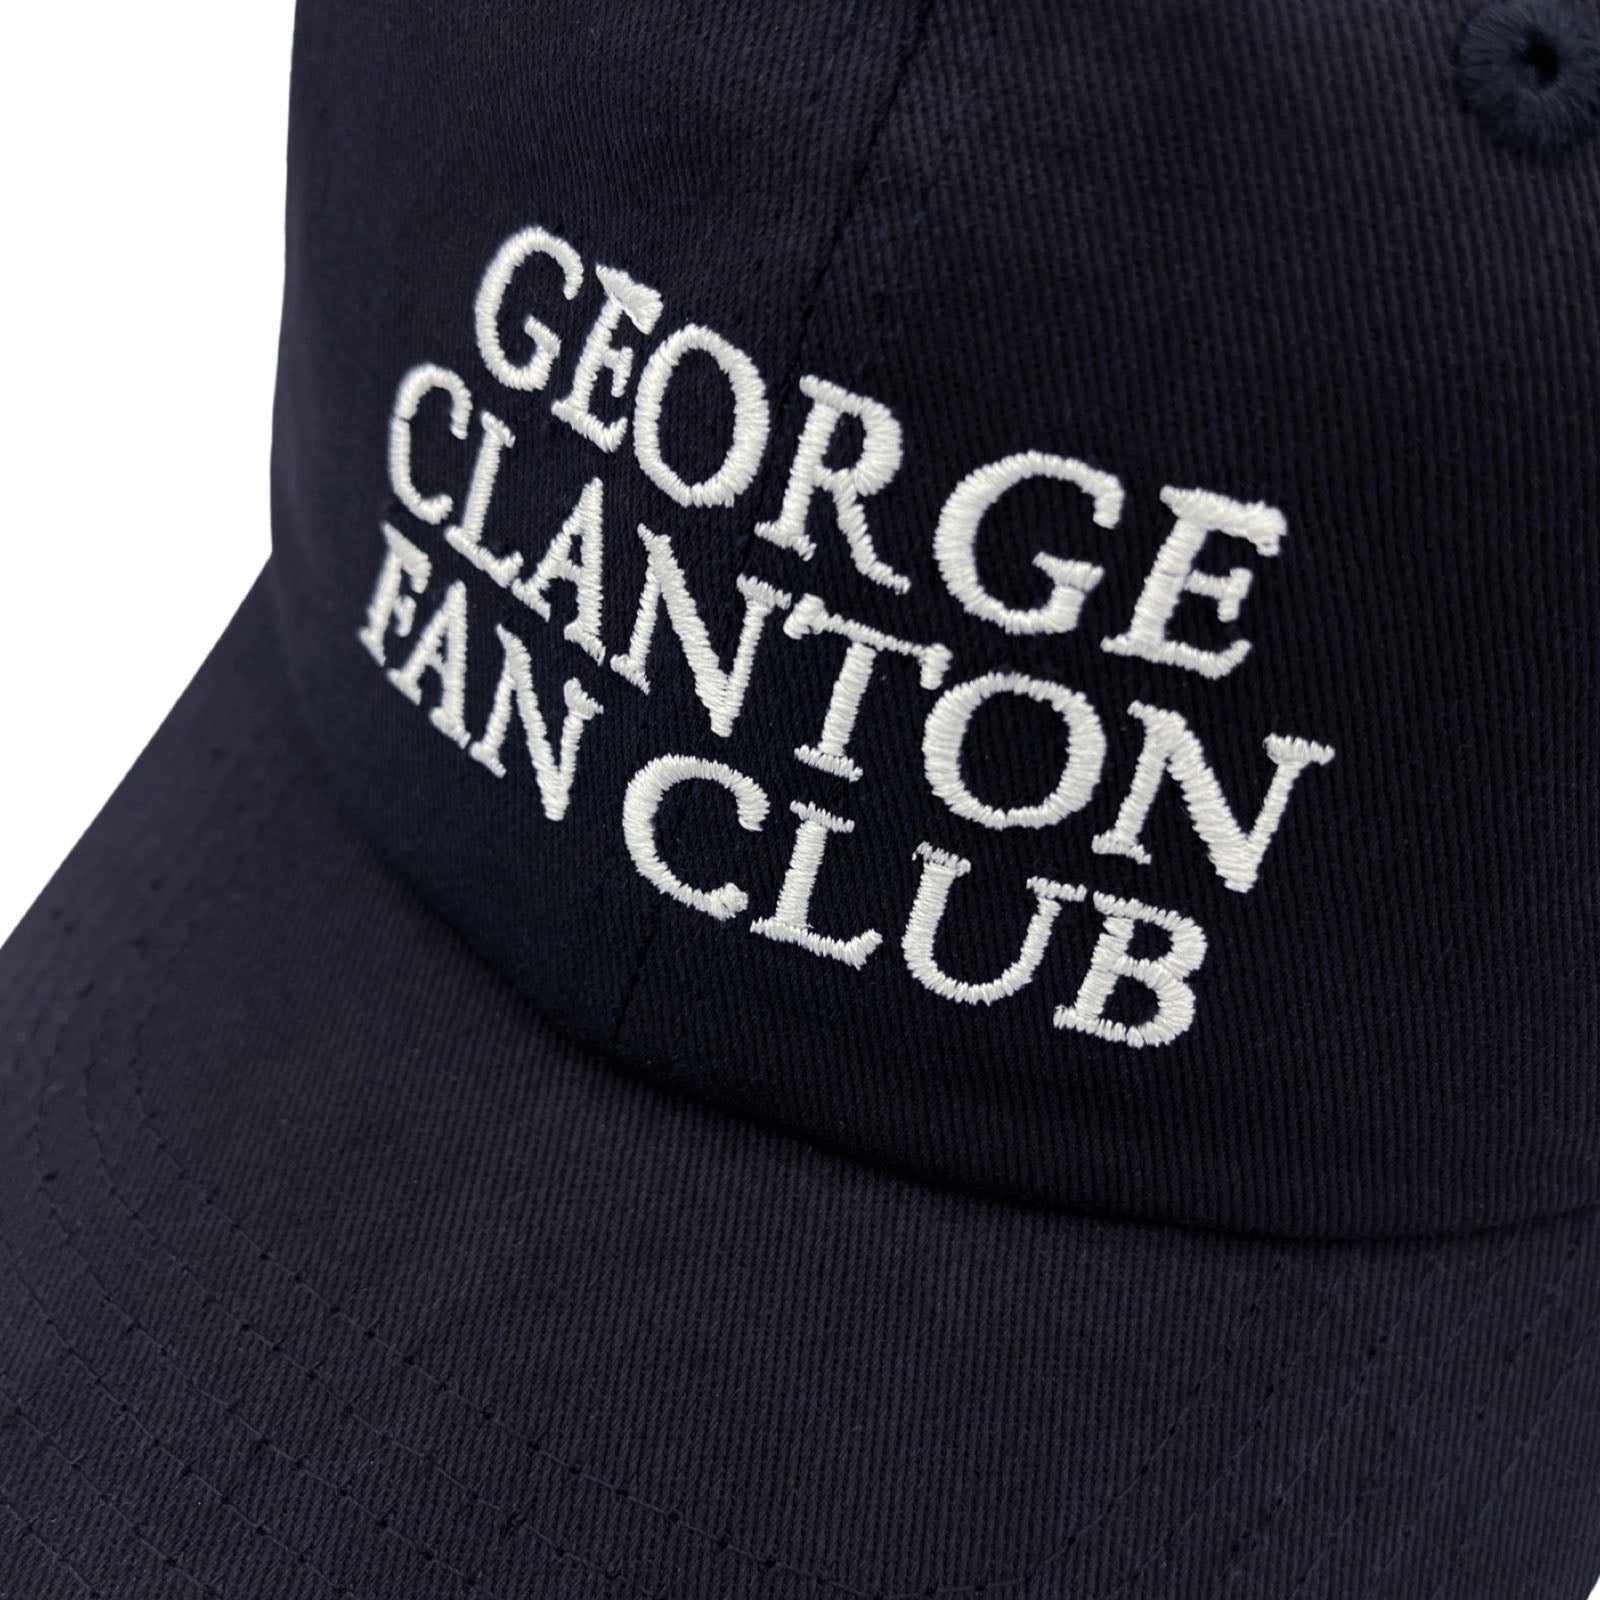 George Clanton Fan Club - George Clanton Fan Club Cap - 100% Electronica Official Store (Photo 4)